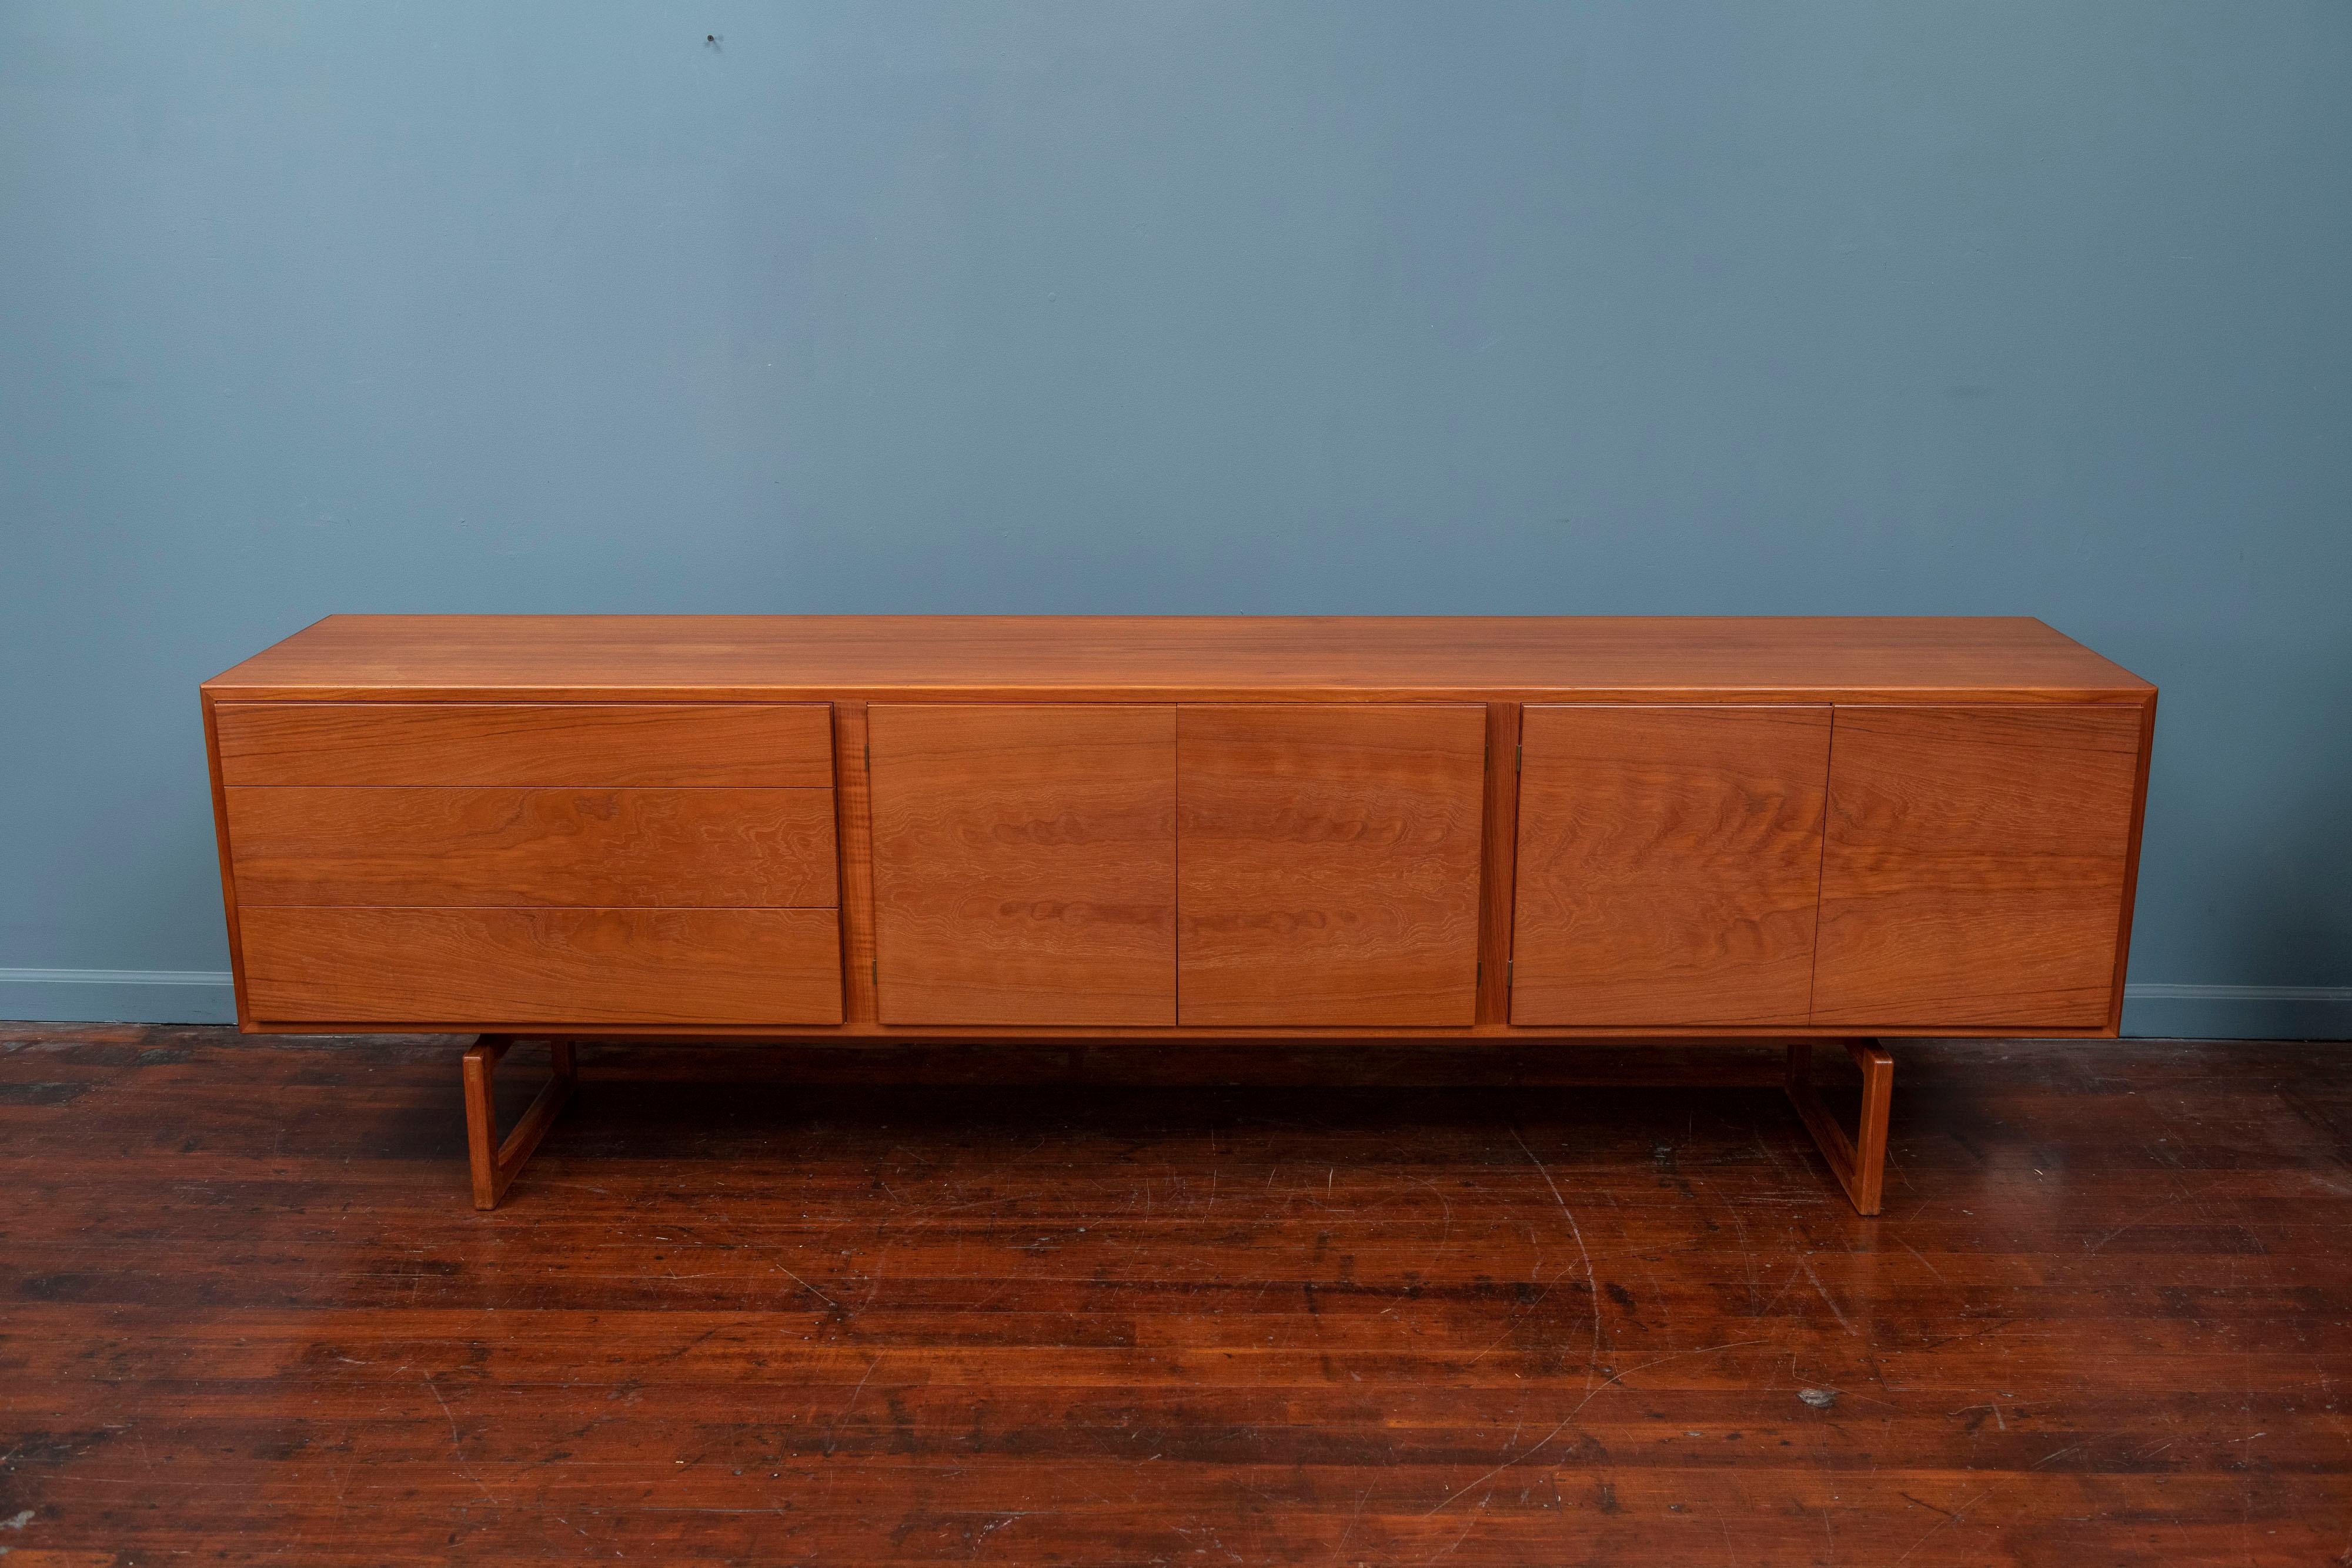 Rare Danish credenza model: MK511 designed by Arne Hovmand Olsen for Mogens Kold. Gorgeous Minimalist modernist design in solid teak. The entire front of the cabinet is made from a single piece of teak which results in a gorgeous bookmatched grain